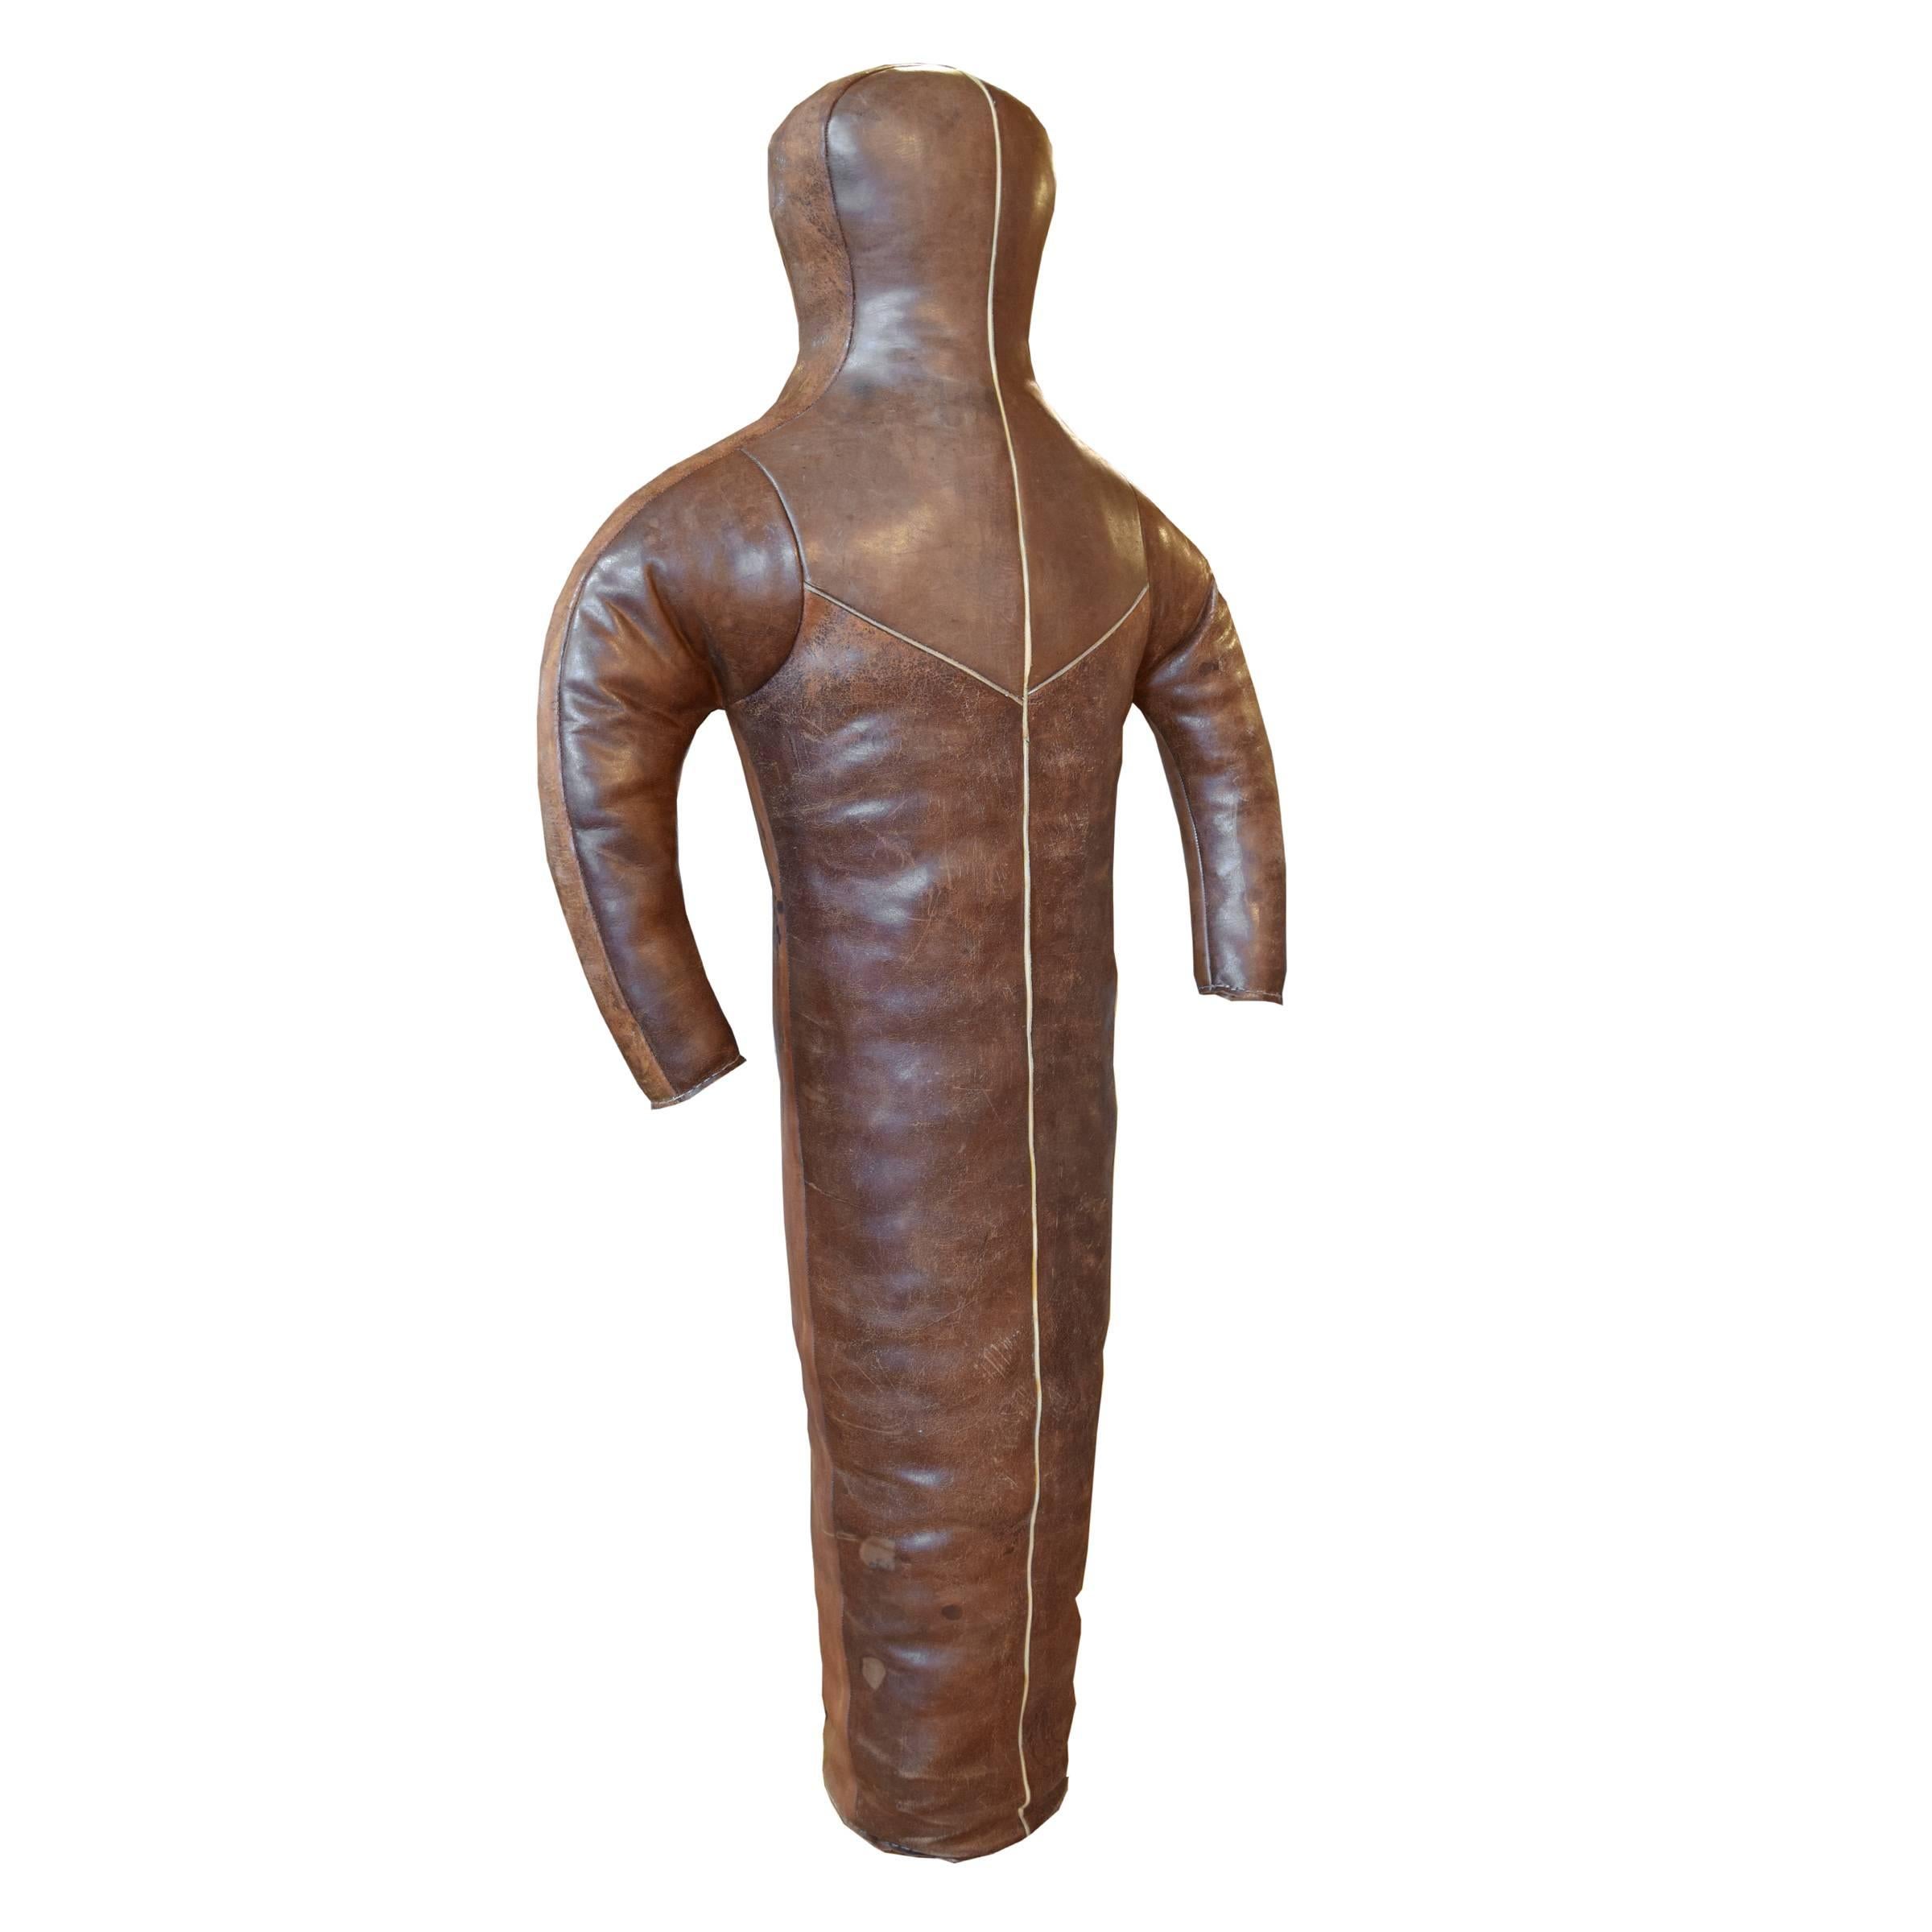 Fun leather wrestling dummy from a gymnasium in the Czech Republic, circa 1930. Practice your moves at home!